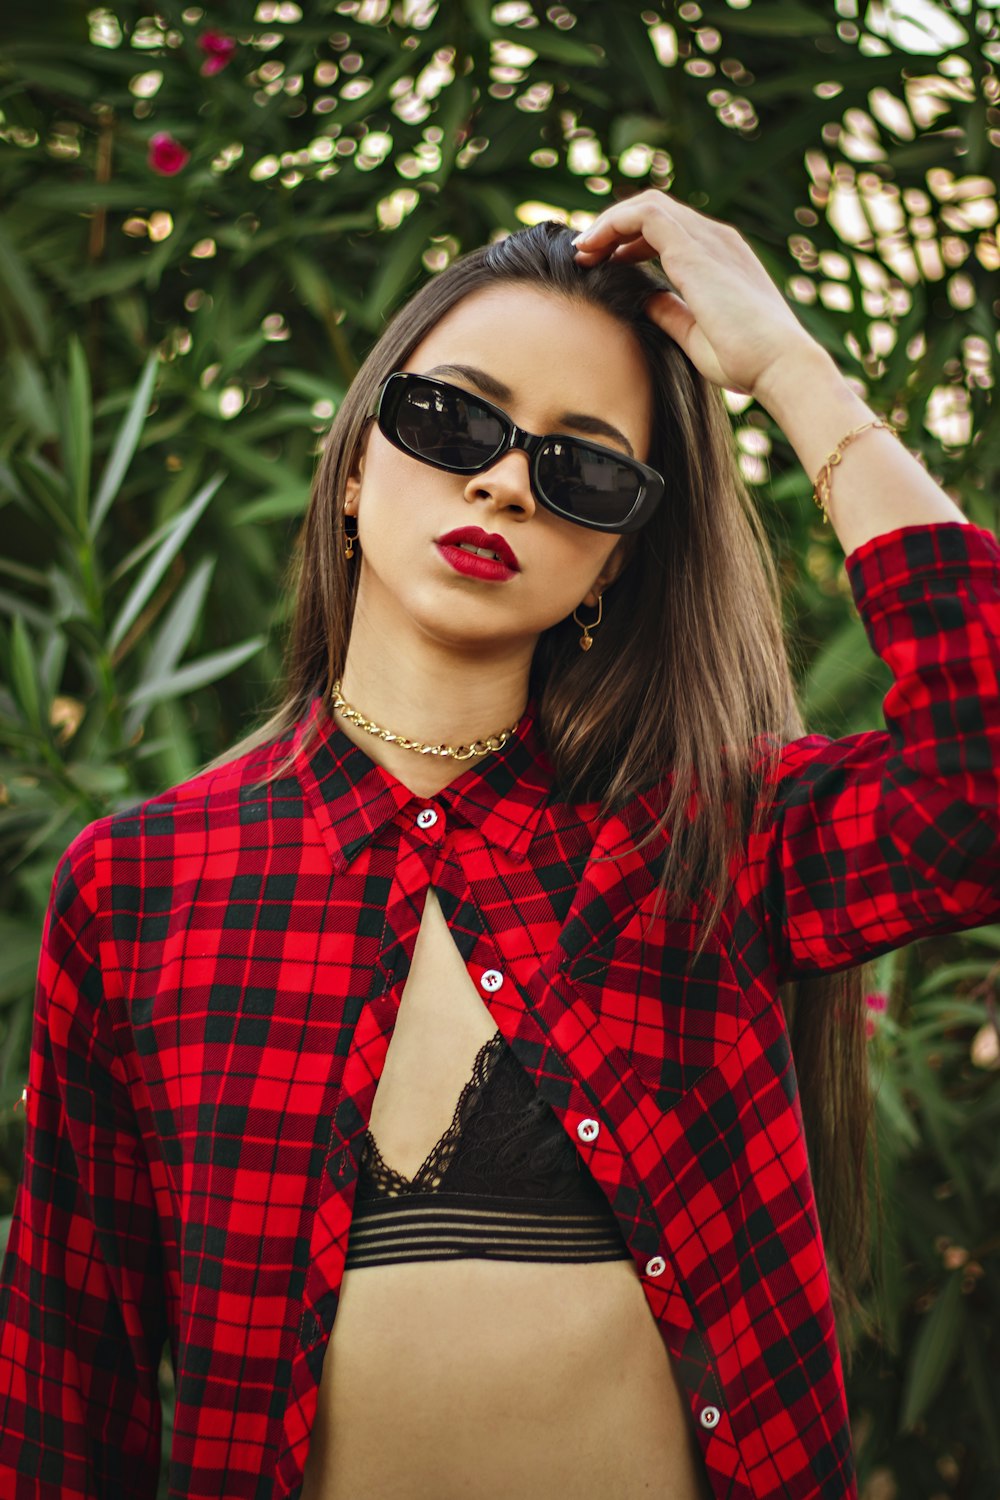 woman in red and black plaid dress shirt wearing black sunglasses